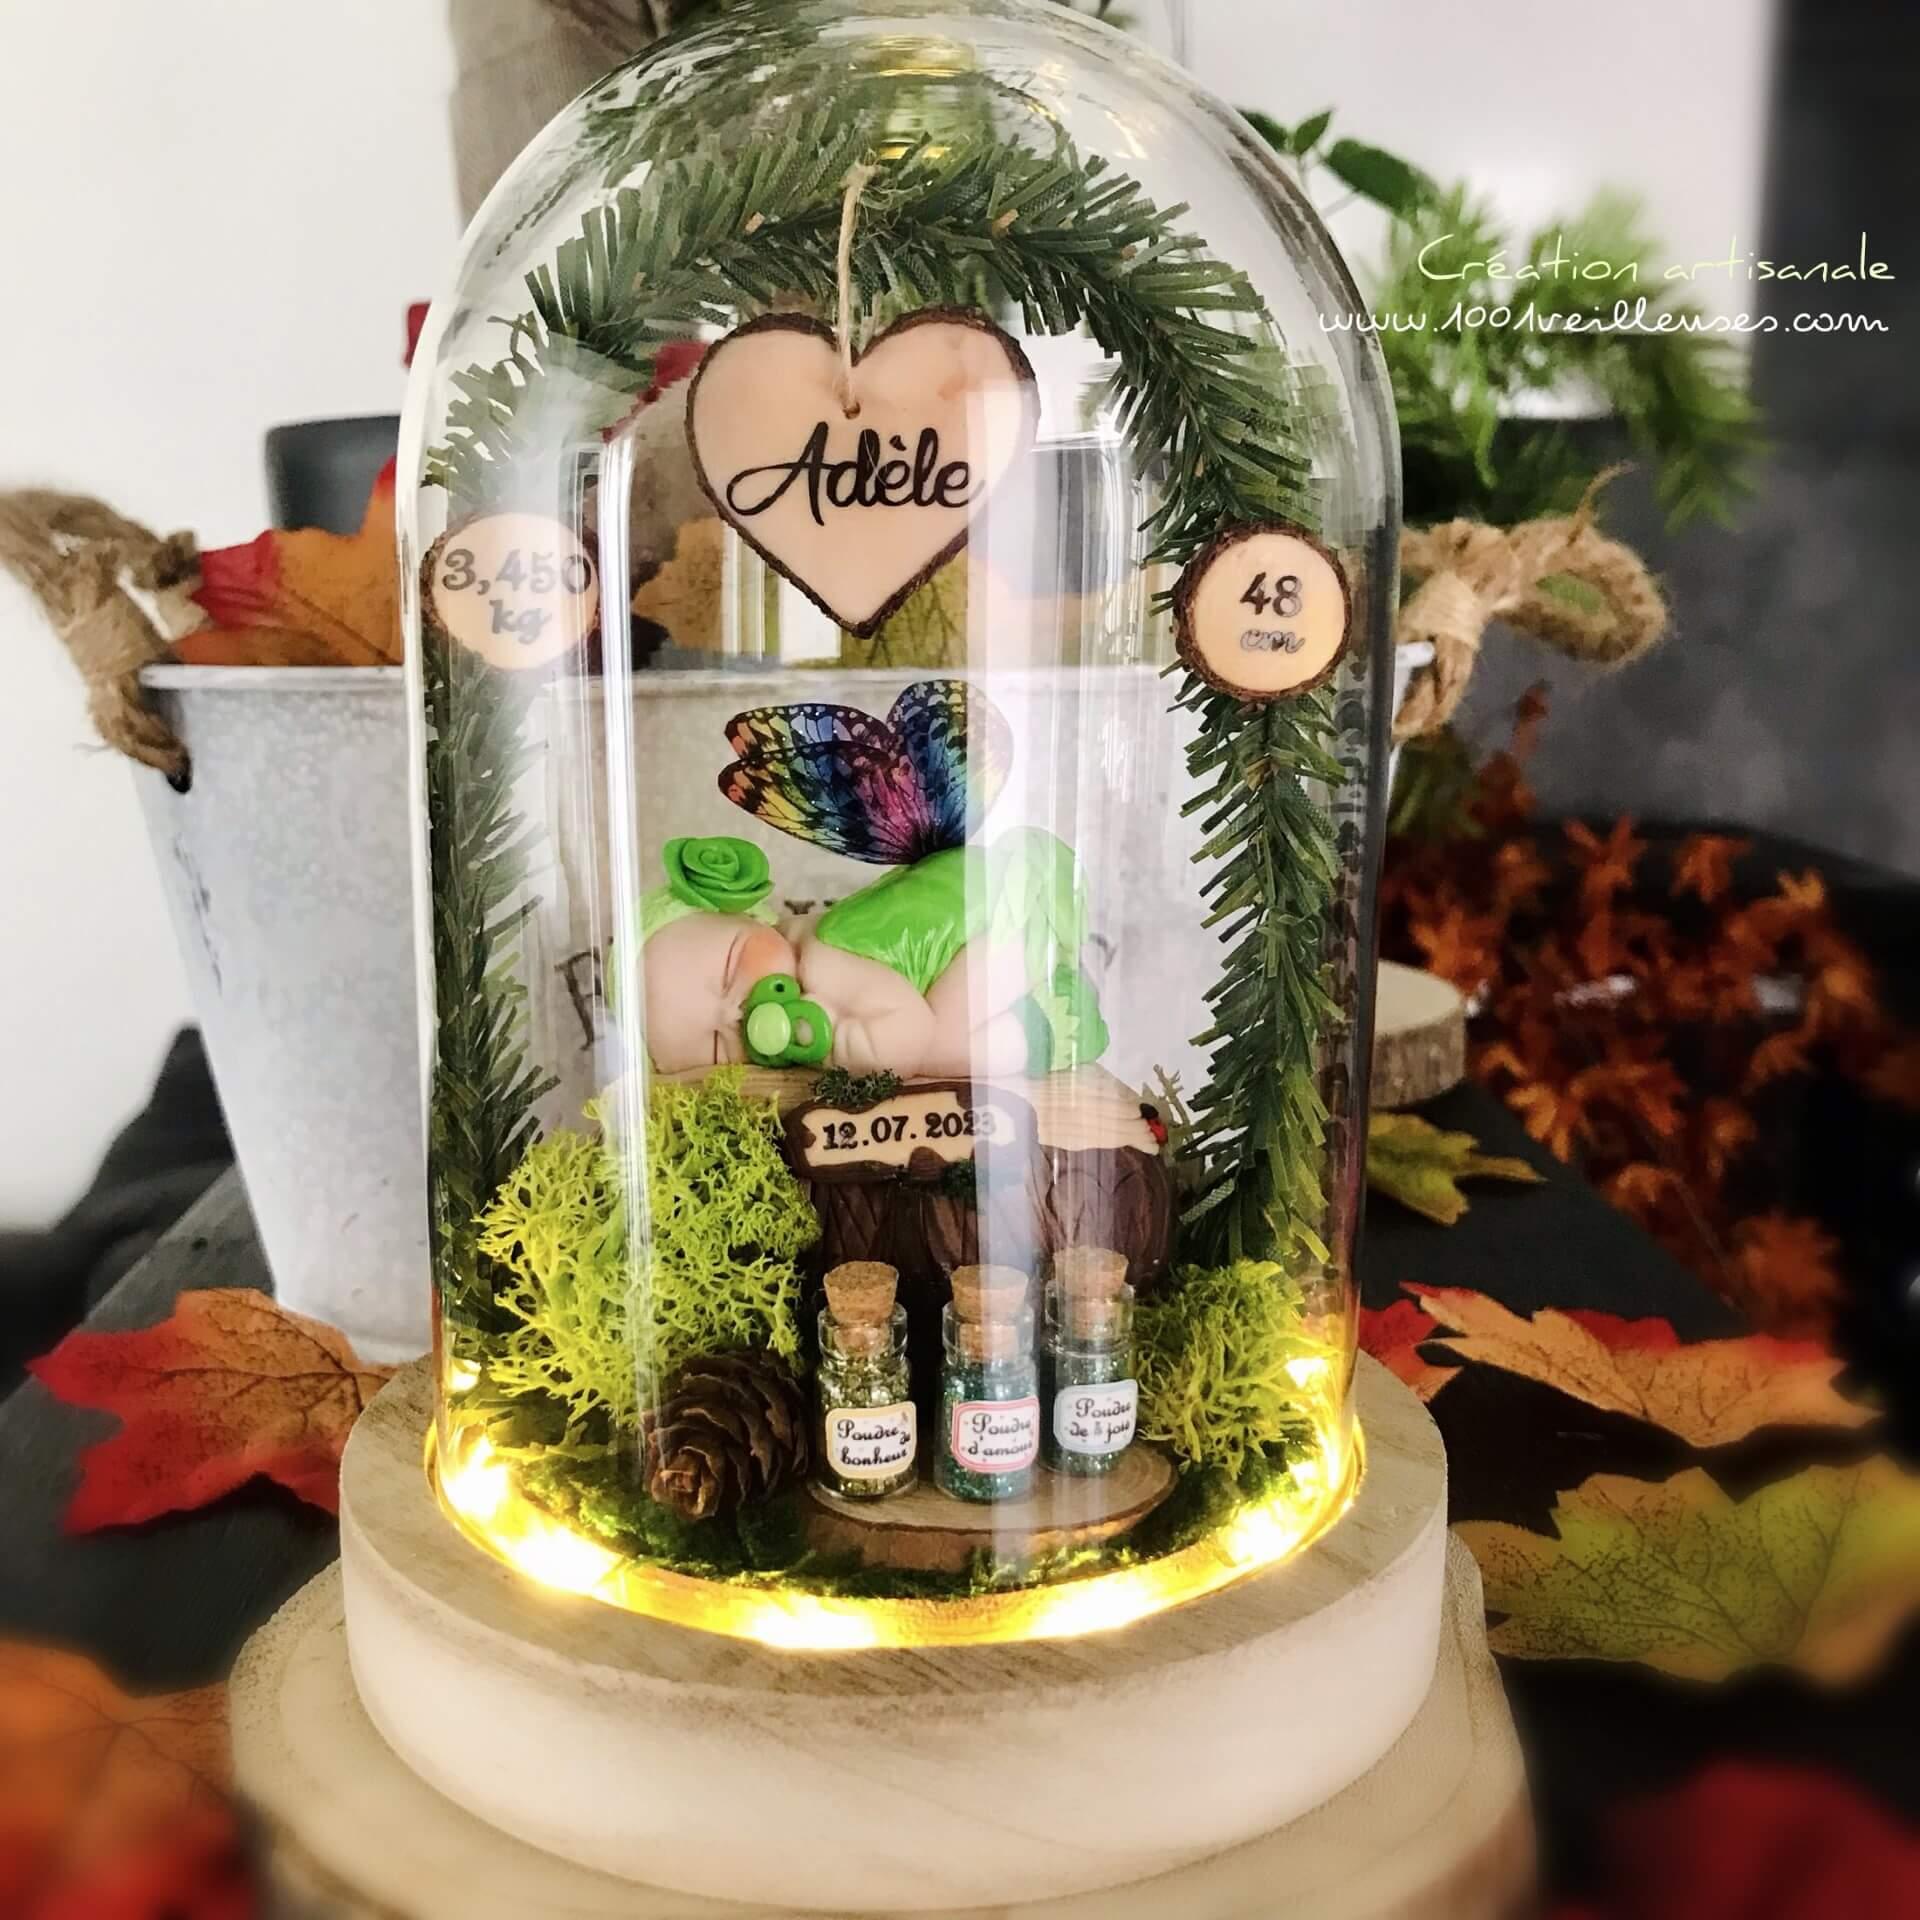 Enchanted LED Bell, green fairy theme, handmade work - Lovely gift for a baby